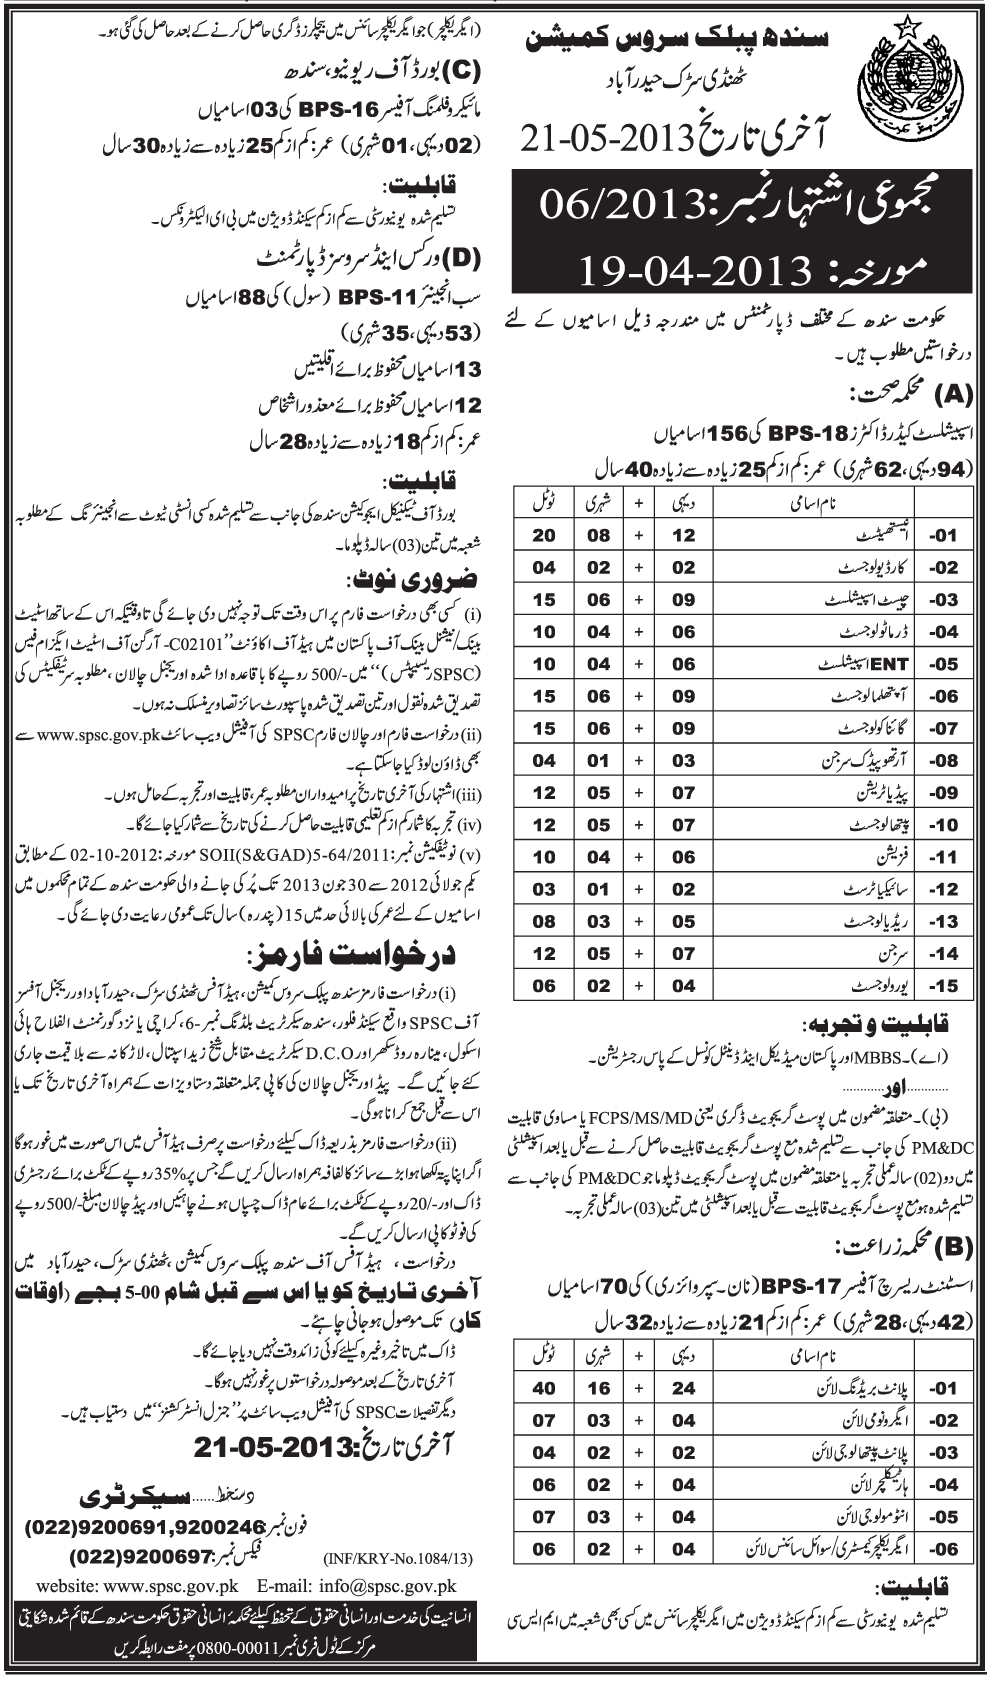 SPSC Jobs 2013 April Specialist Doctors / Civil Sub Engineers / Research Officers